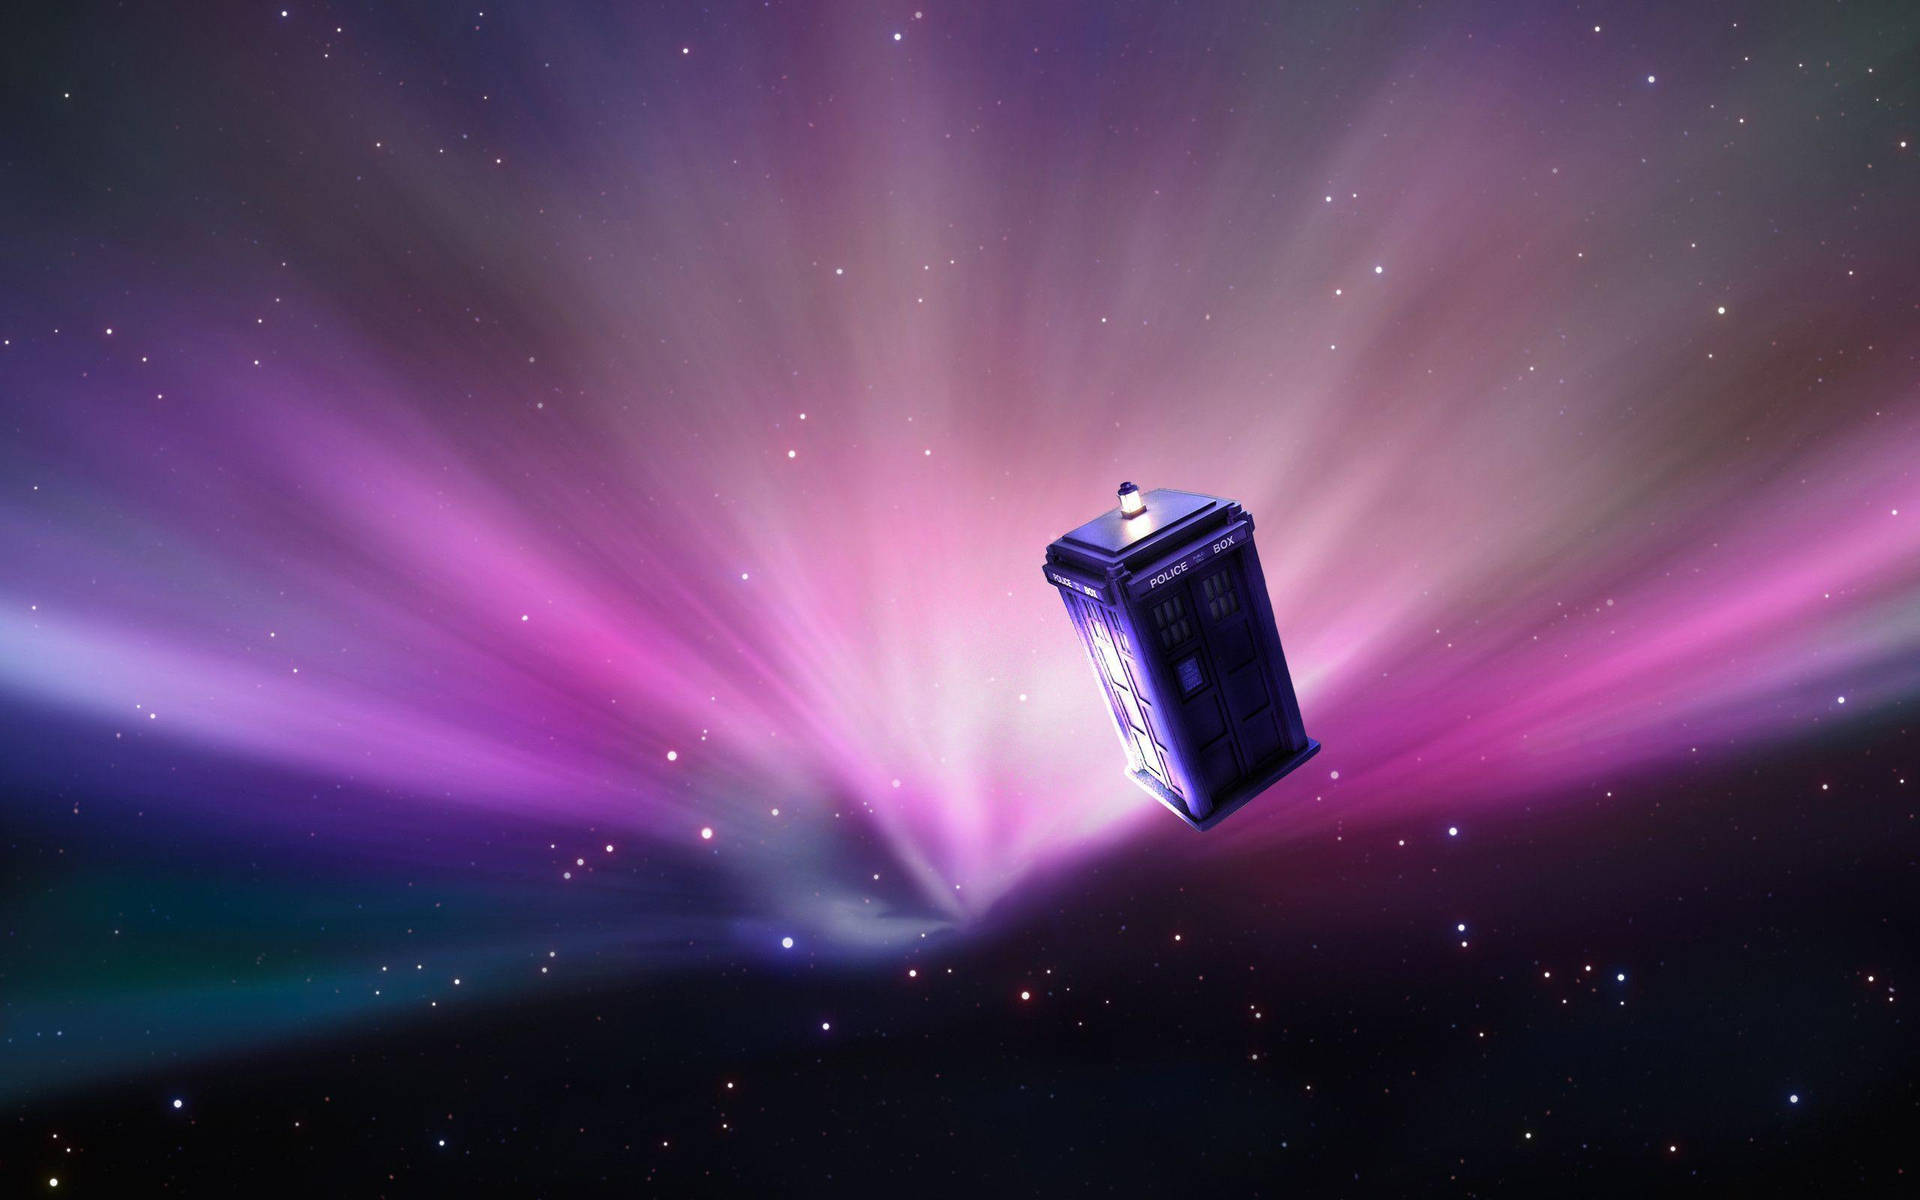 Doctor Who's Iconic Tardis Flying Through Space Background